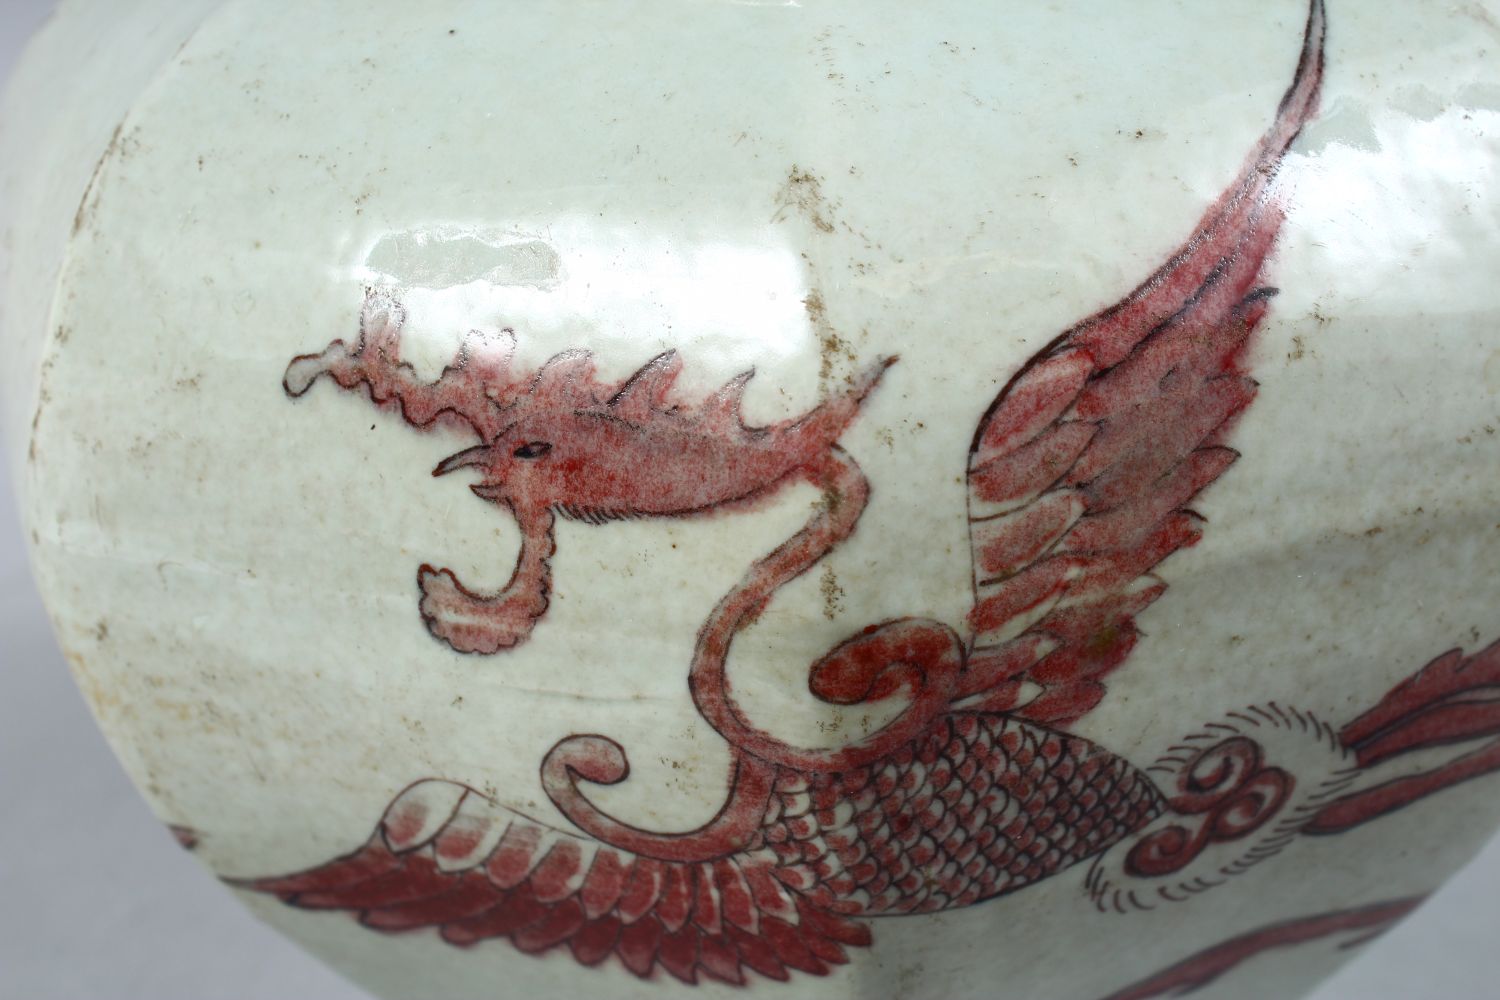 A CHINESE IRON RED DECORATED OCTAGONAL PORCELAIN JAR, the body of the jar decorated in iron red to - Image 6 of 8